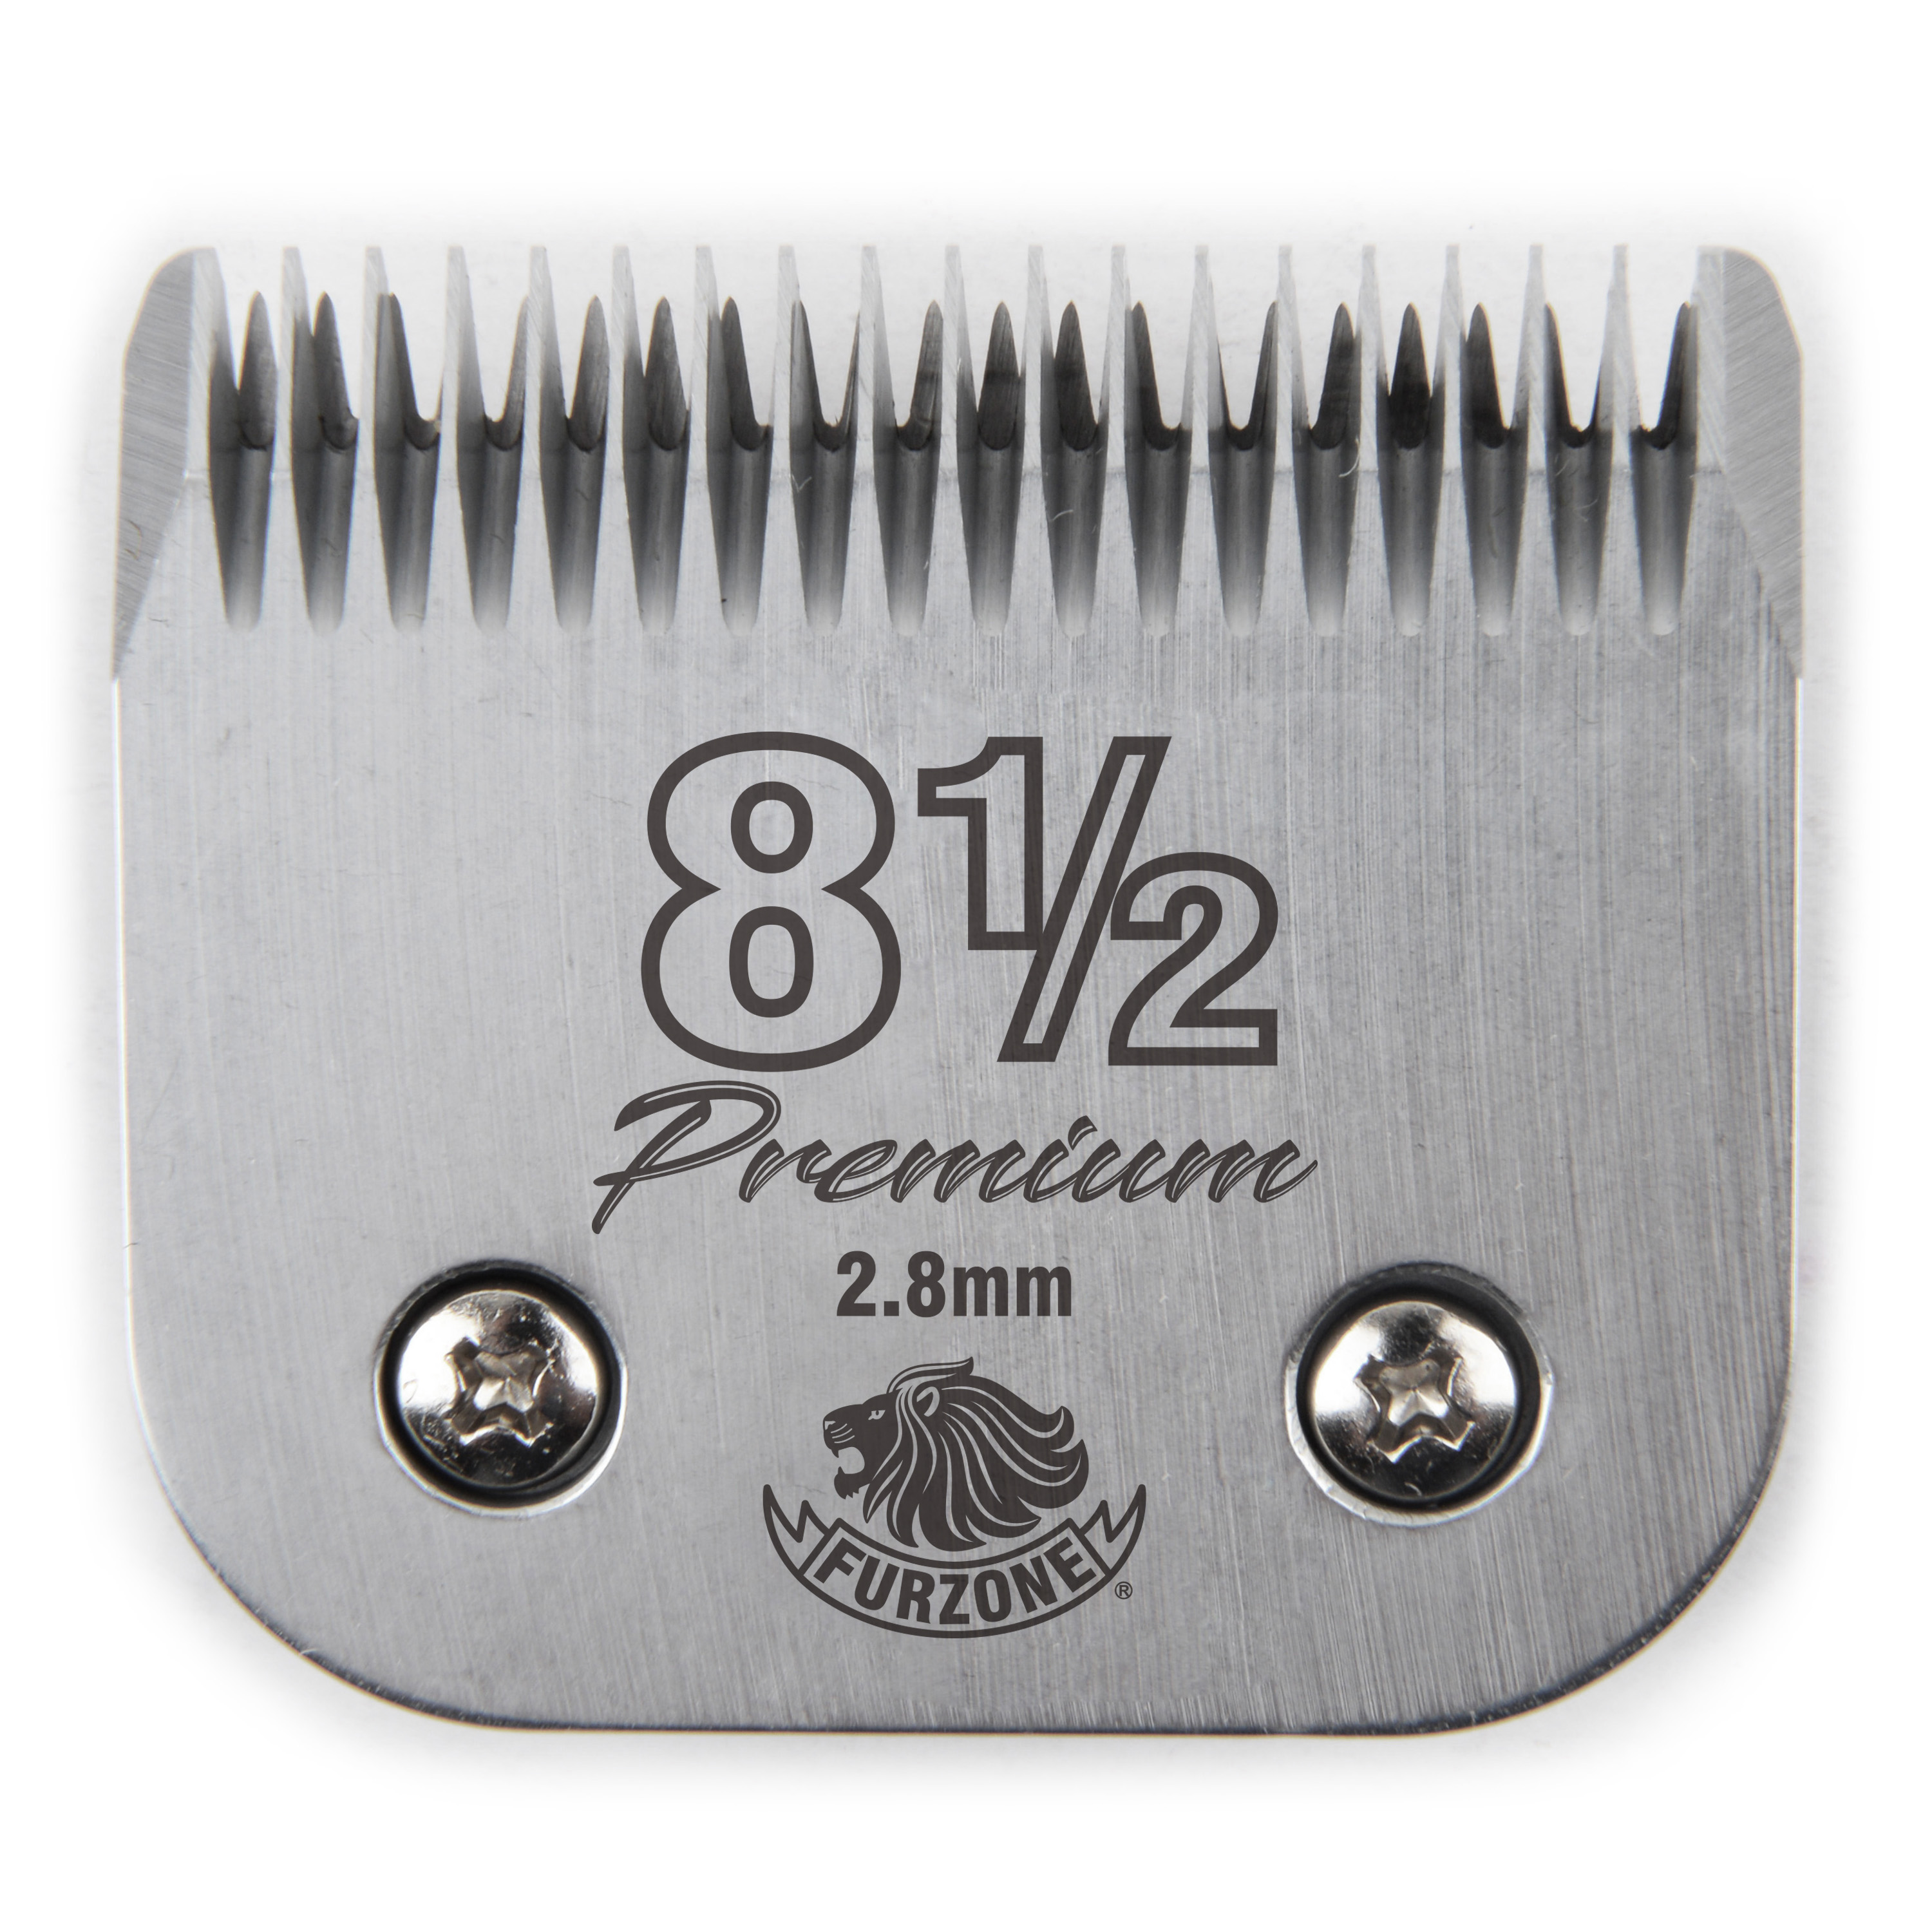 Furzone #8 1/2-2.8mm Professional A5 Detachable Blade - Made Of Extra Durable Japanese Steel